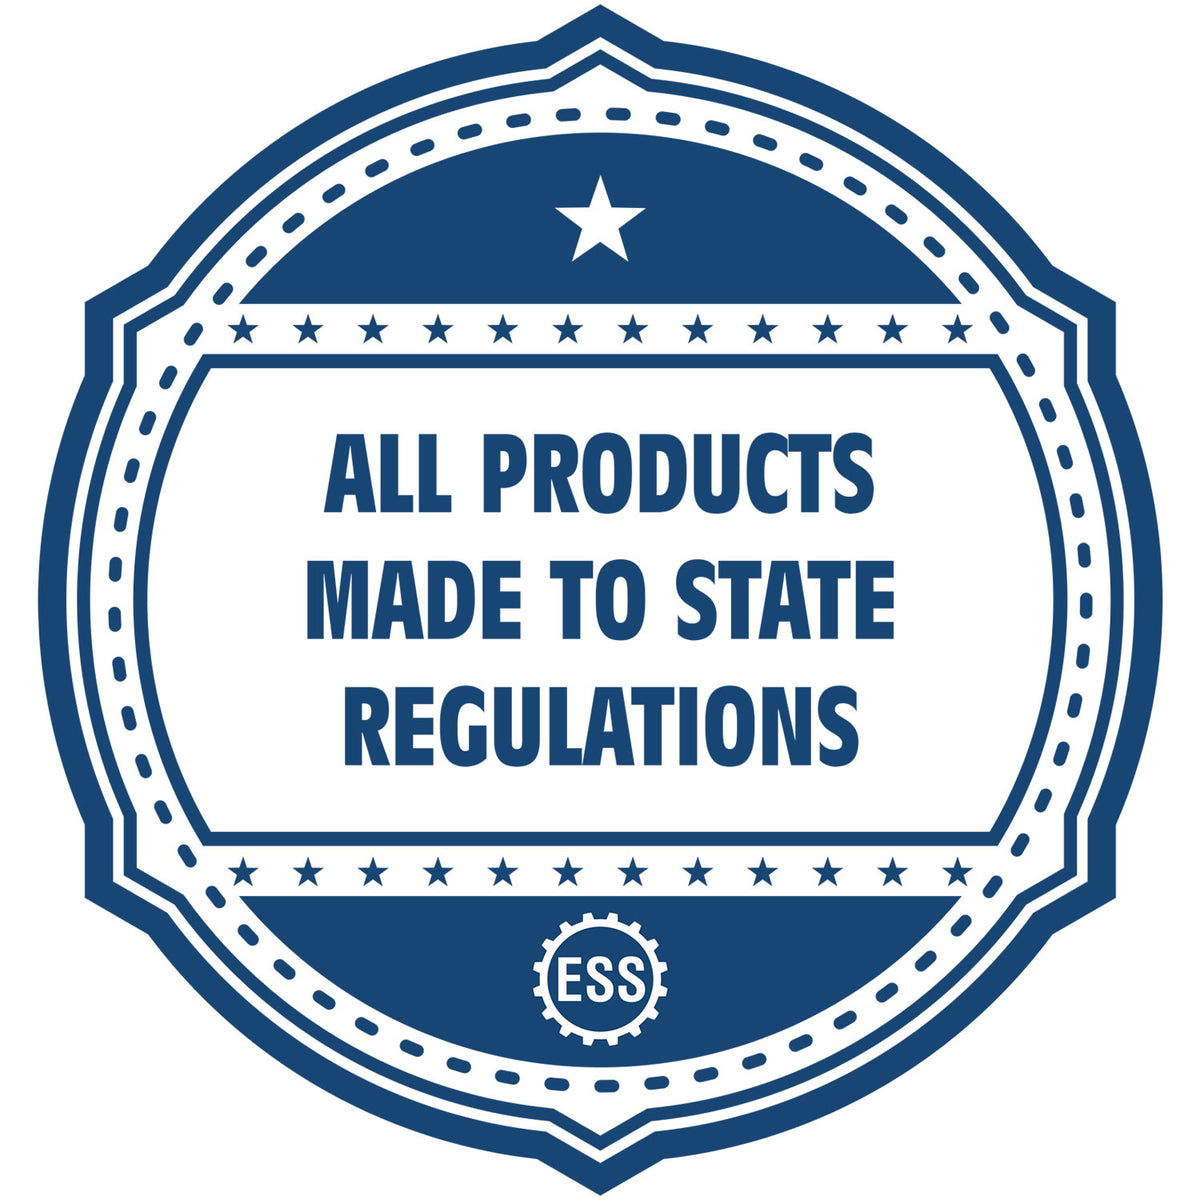 An icon or badge element for the Long Reach Tennessee PE Seal showing that this product is made in compliance with state regulations.